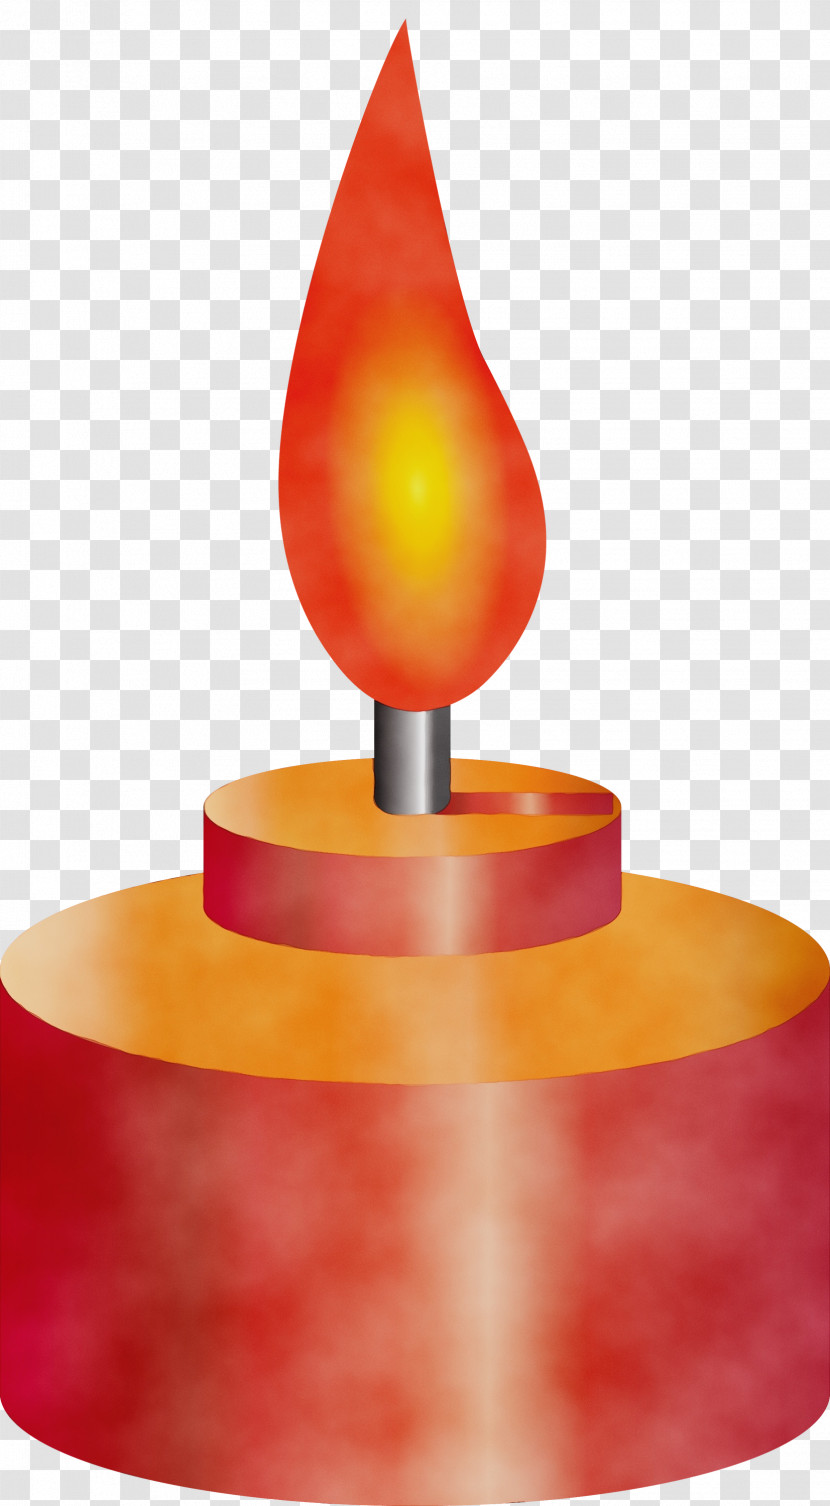 Flameless Candle Lighting Wax Candle Transparent PNG